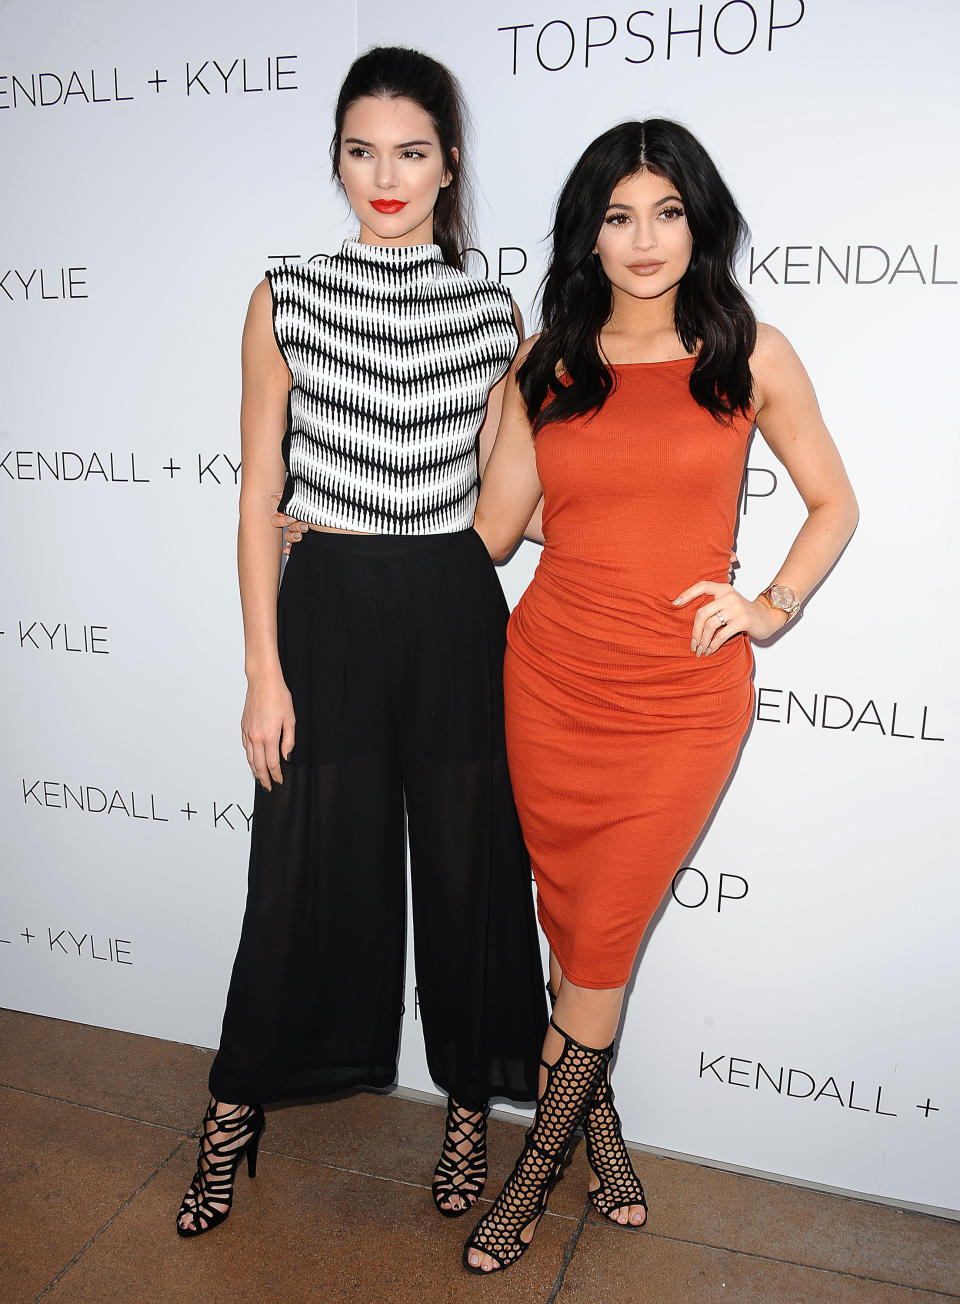 LOS ANGELES, CA - JUNE 03:  Kendall Jenner and Kylie Jenner attend the Kendall + Kylie fashion line launch party at TopShop on June 3, 2015 in Los Angeles, California.  (Photo by Jason LaVeris/FilmMagic)